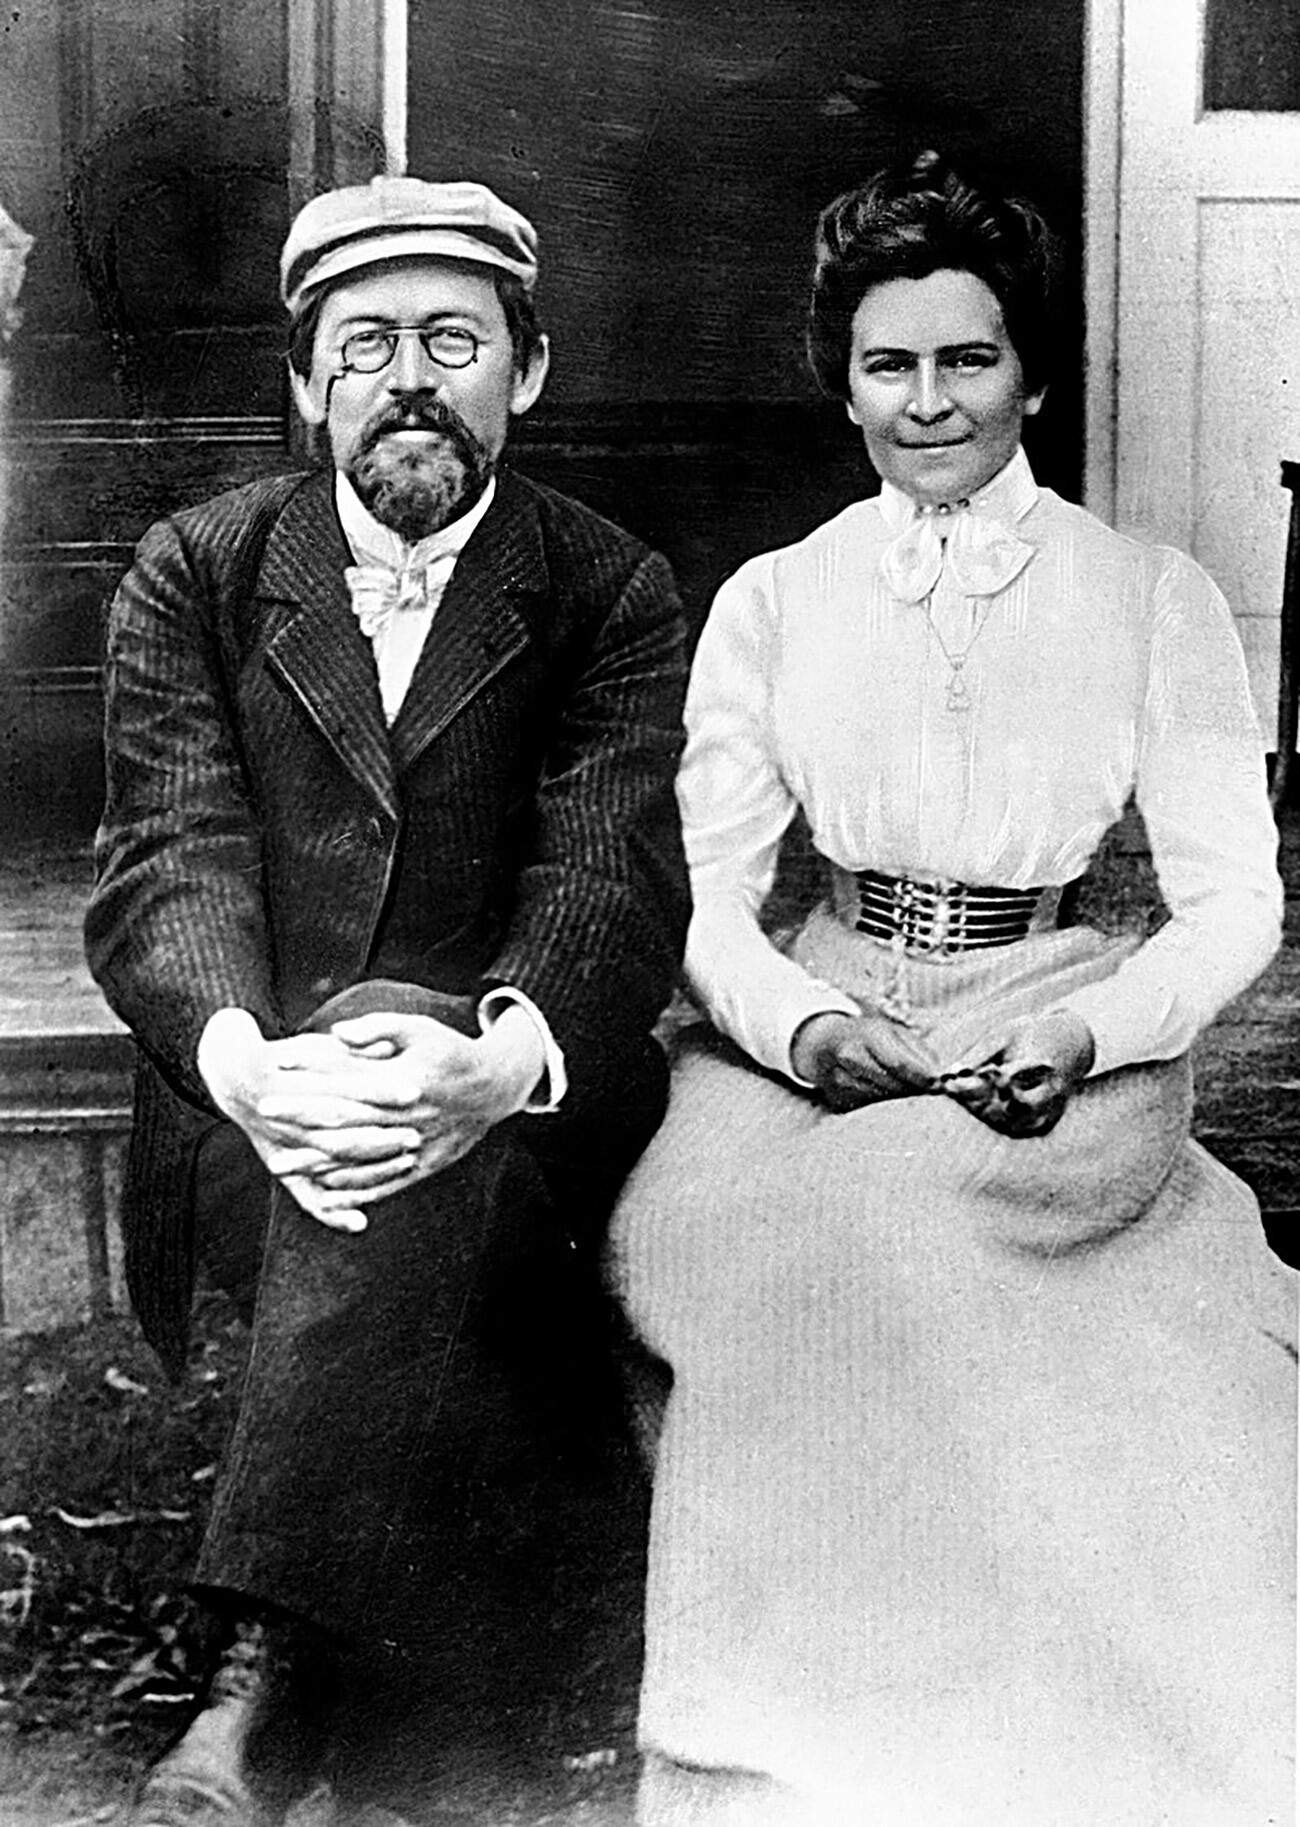 Chekhov and his wife Olga Knipper